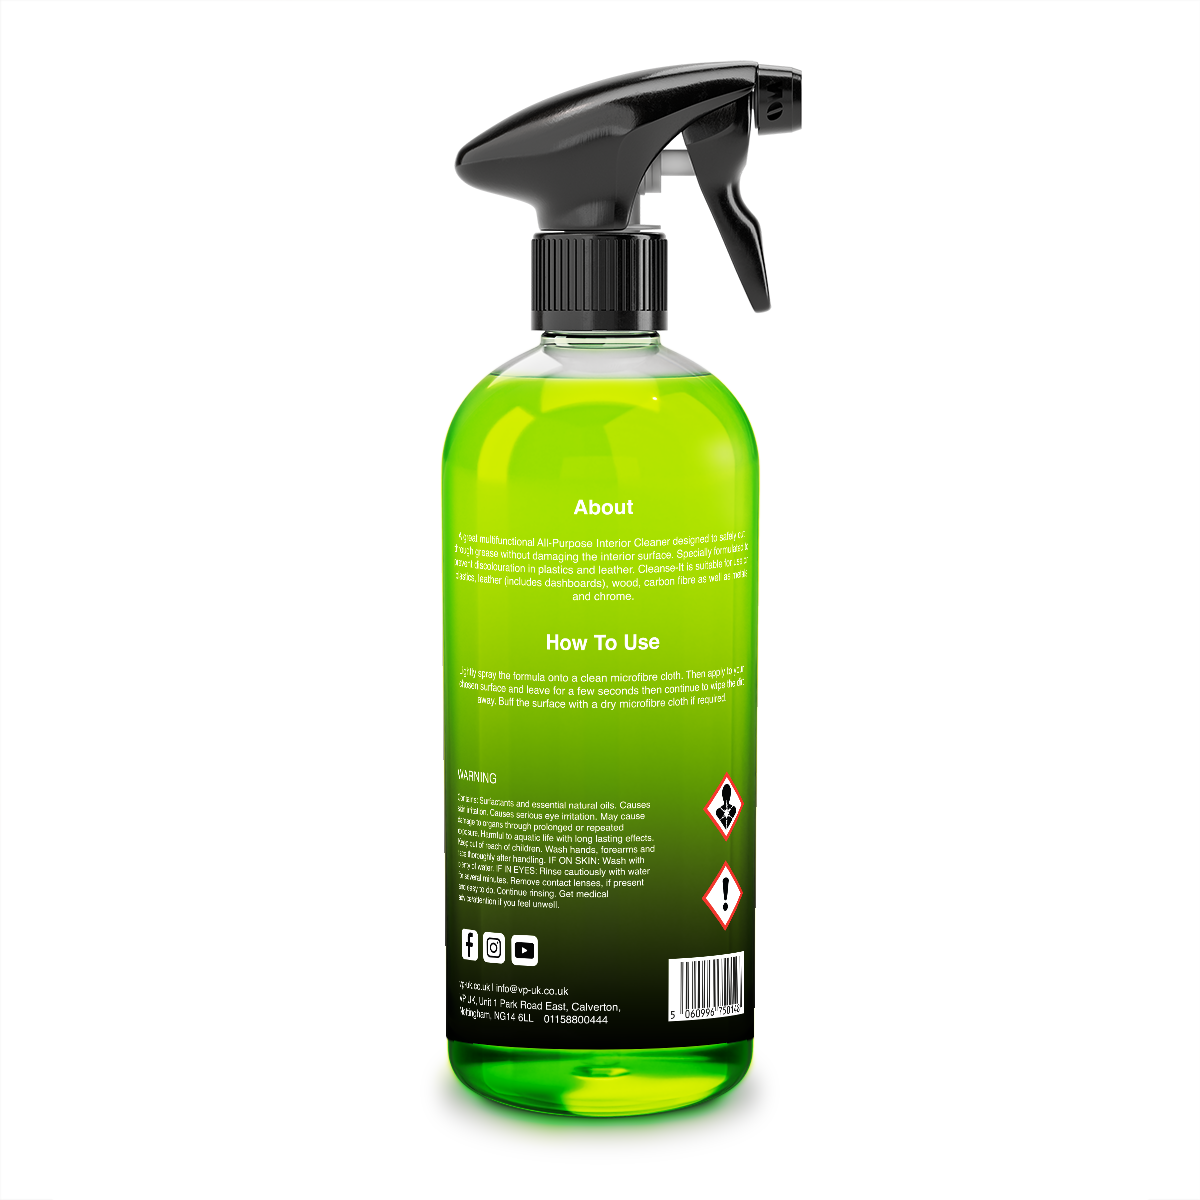 Cleanse-It-all-purpose-interior-car-cleaner-500ml-back-VP.png